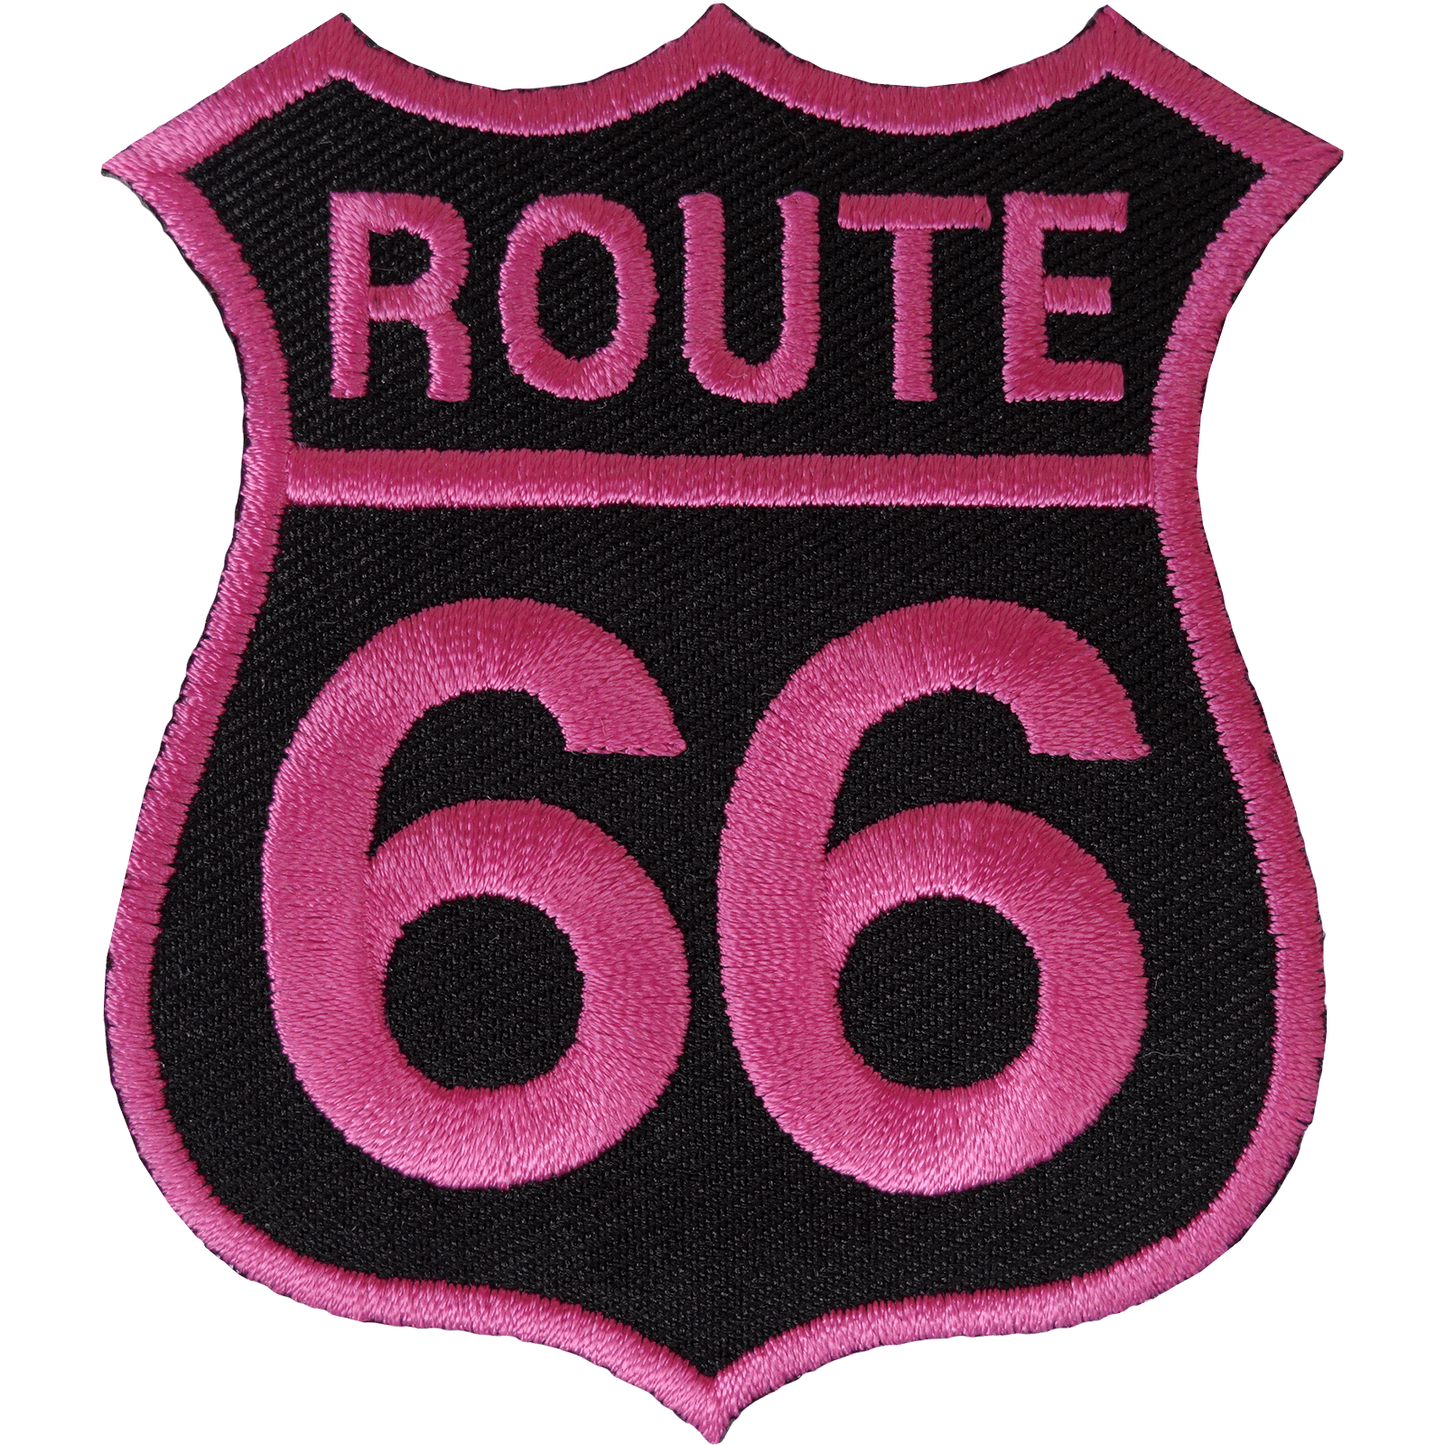 Route 66 Iron On Patch Sew On Embroidered Badge Motorbike Motorcycle Biker USA